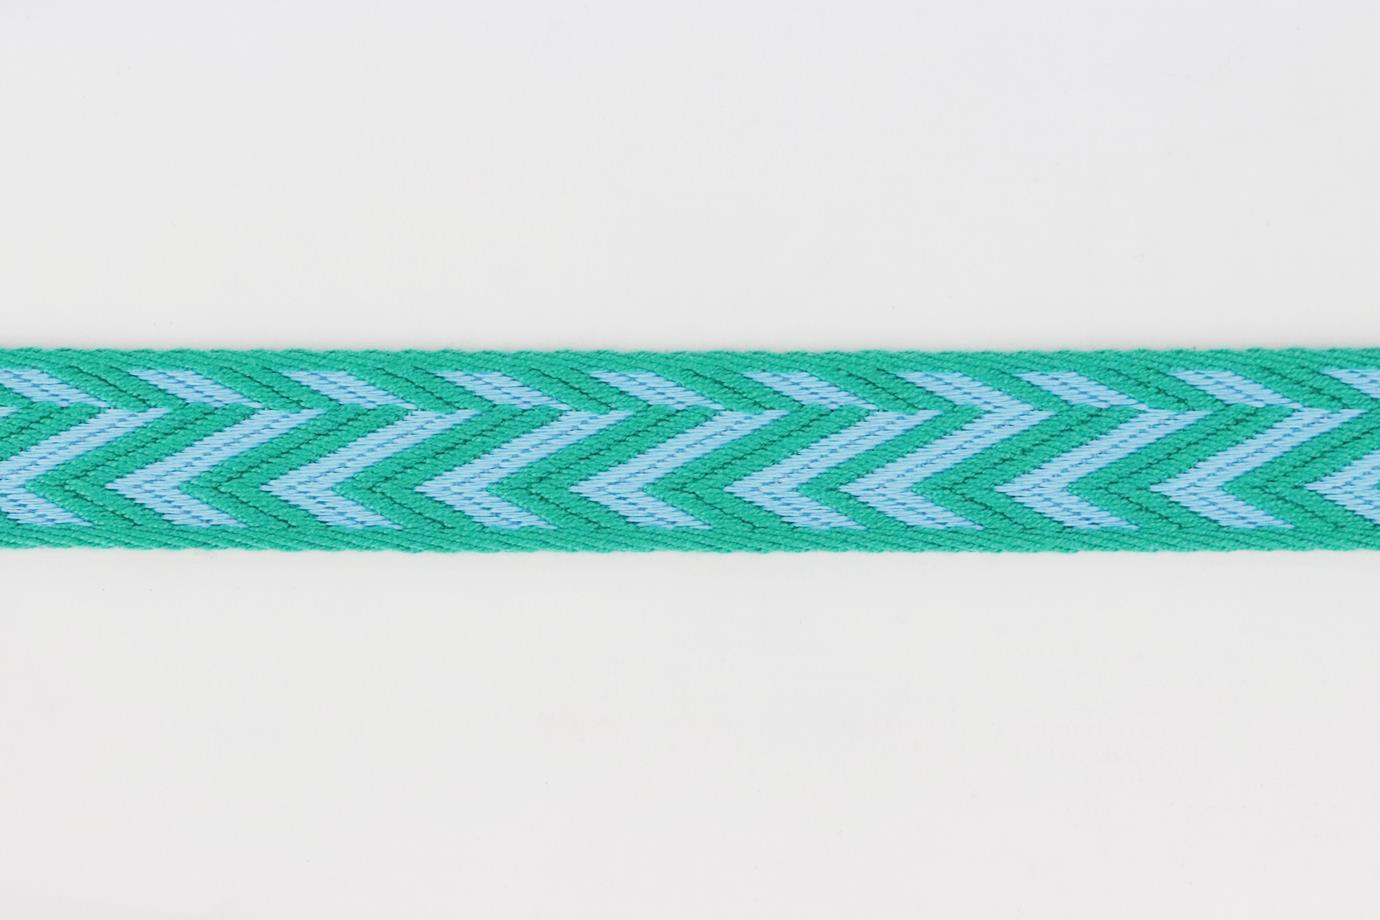 Hermés 2019 Sangle 25mm zigzag canvas bag strap. Made from blue and green zigzag canvas with blue leather trim and gold-tone clasps. L: 44.5 in. W: 0.9 in